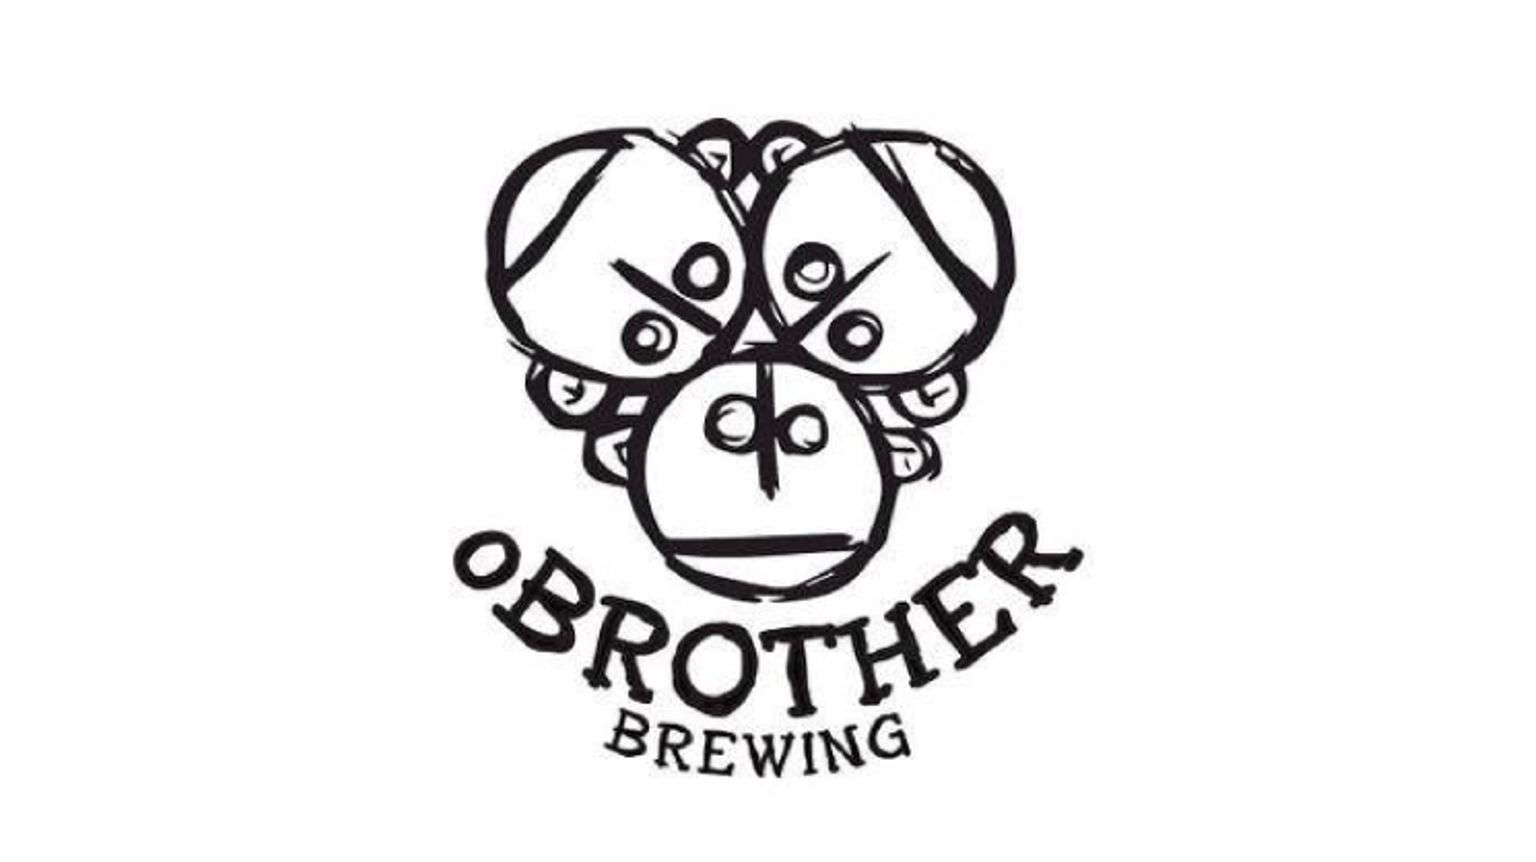 thumbnail for blog article named: O Brother, une brasserie irlandaise familiale